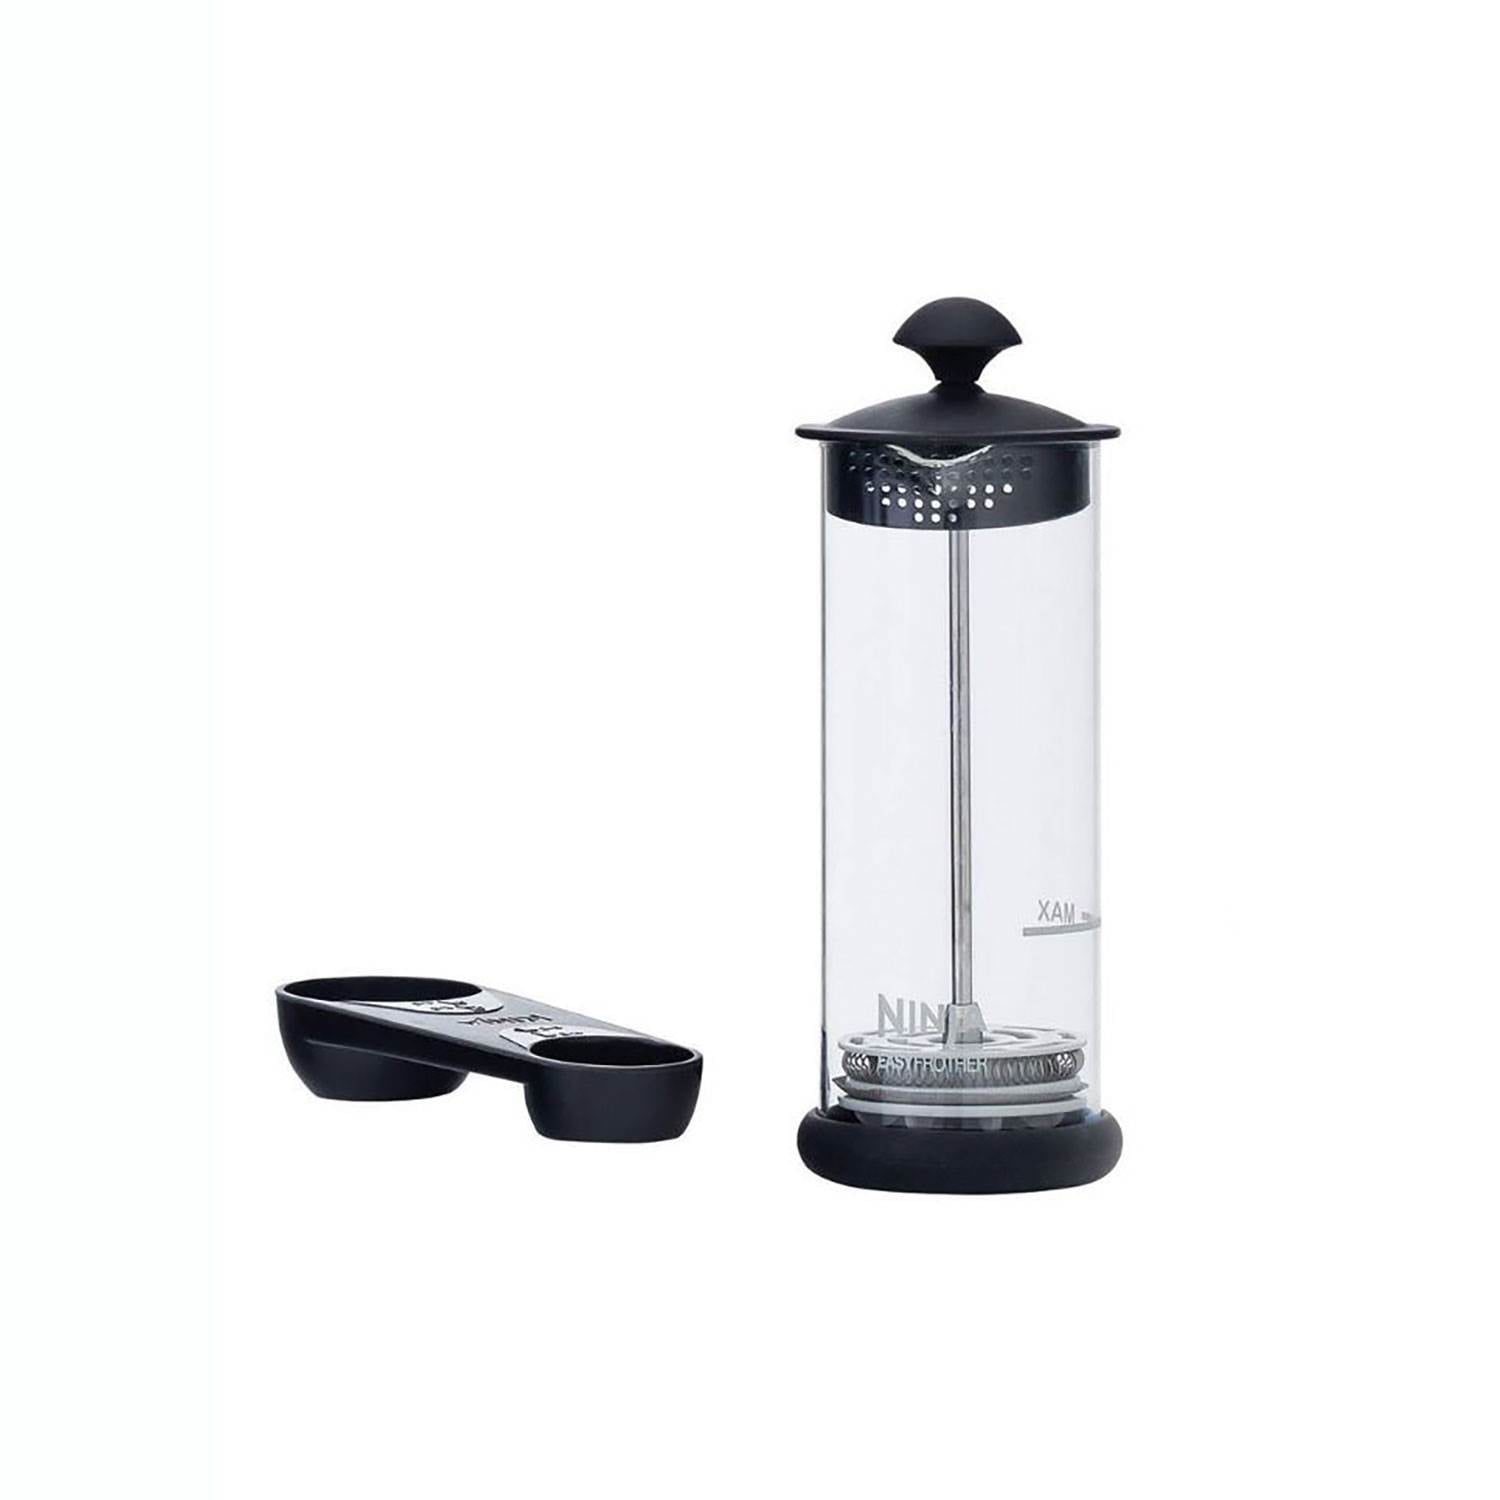 Ninja Specialty Coffee Maker with Glass Carafe Programmable 1.56 quart 10  Cups Multi serve Frother Black Stainless Steel Glass Carafe - Office Depot